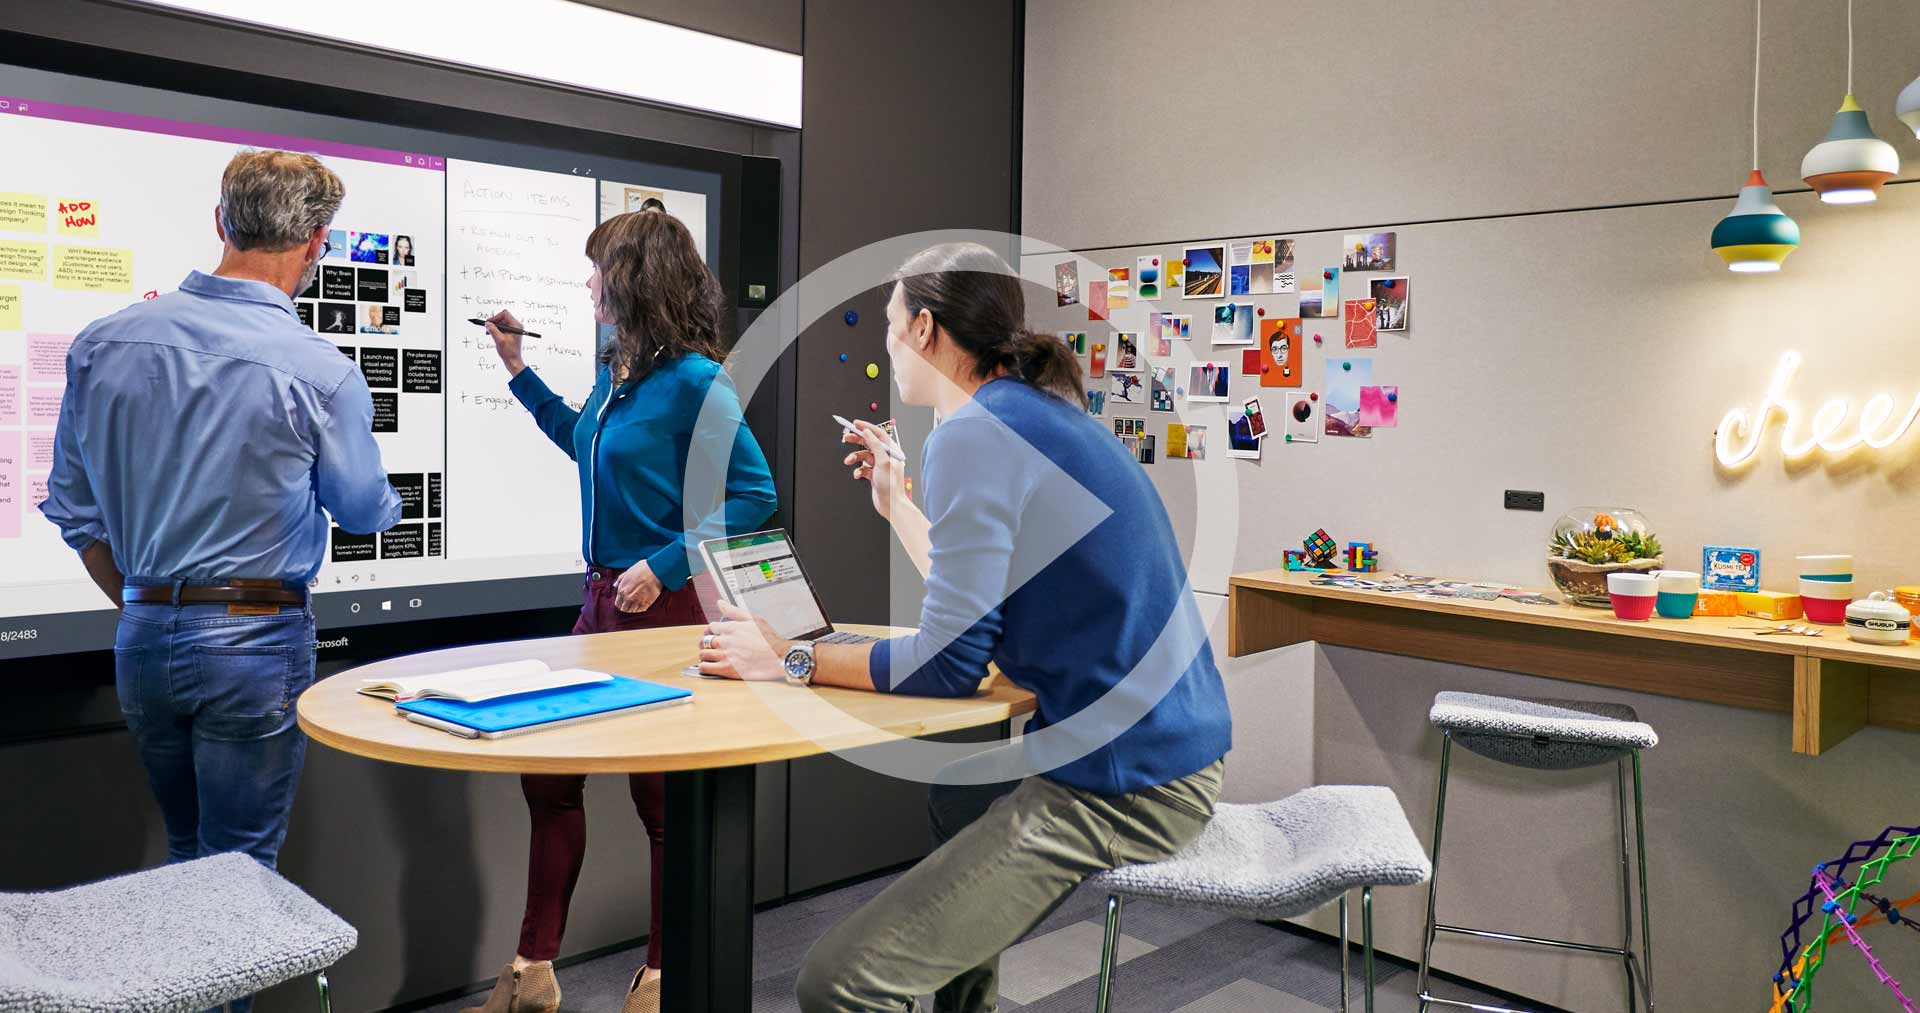 NBS is a Microsoft Surface HUB Authorized Reseller